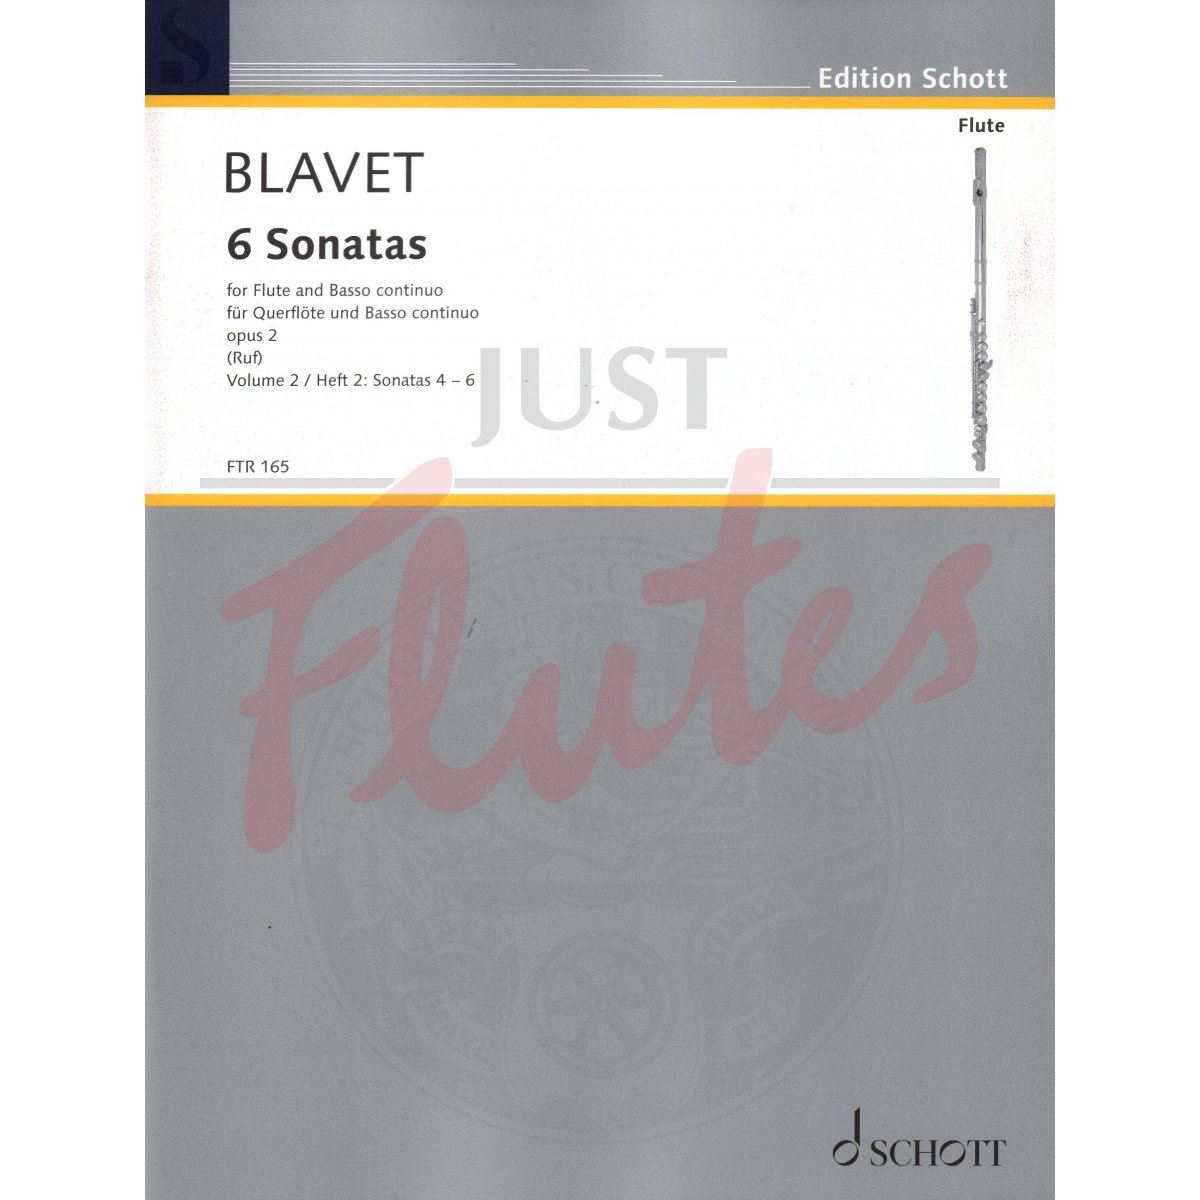 6 Sonatas for Flute and Basso Continuo